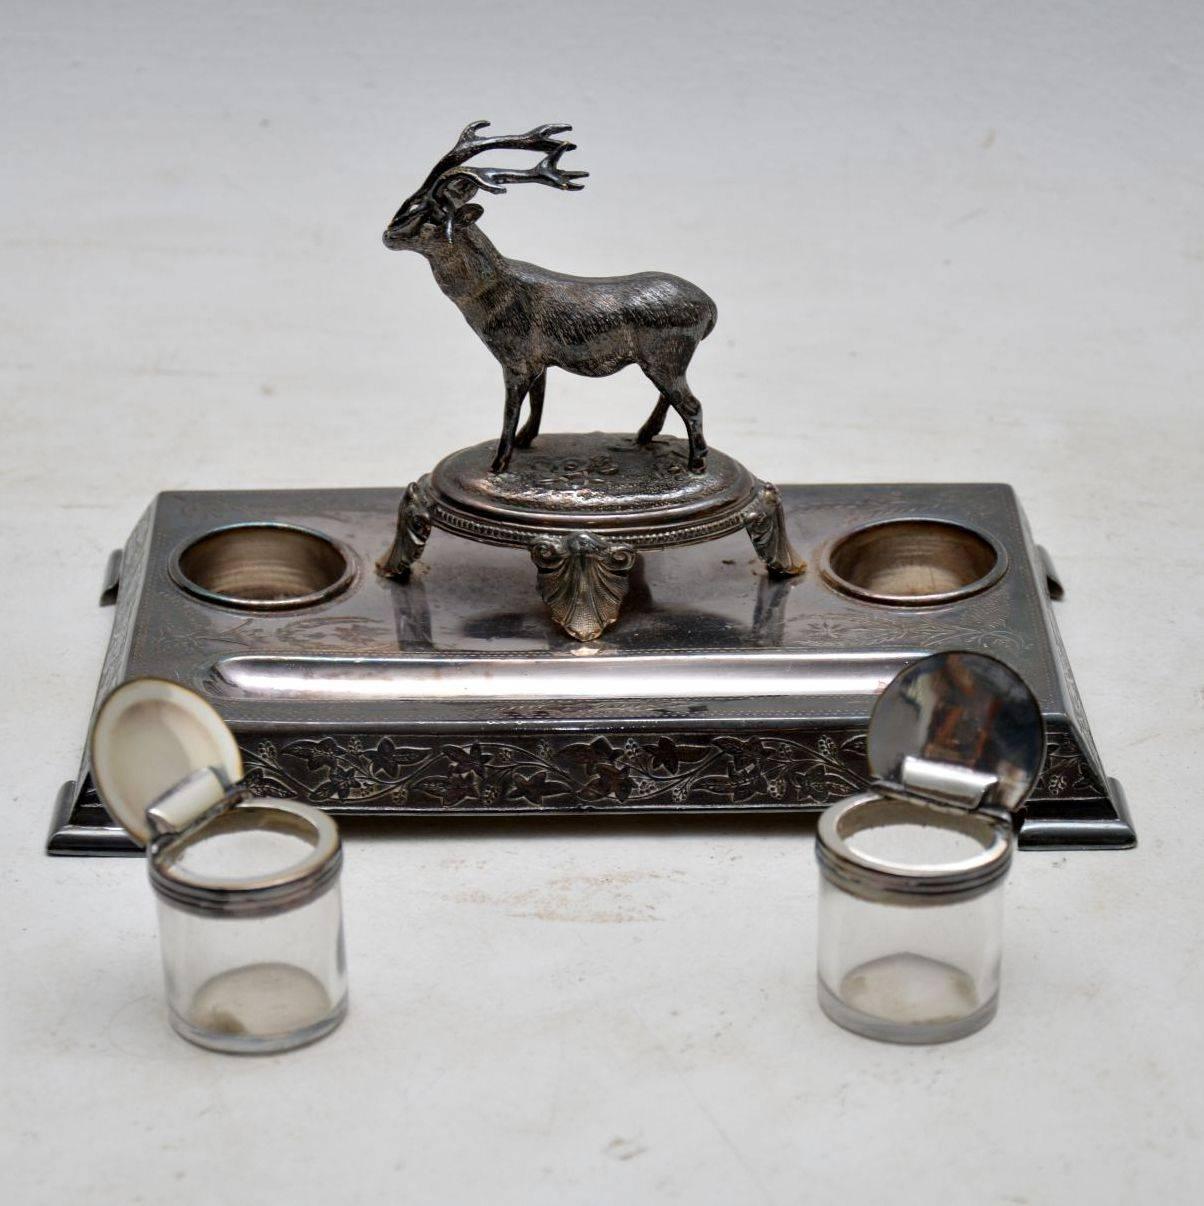 Antique Victorian silver plated inkwell stand with a well defined stag in the centre. It was made by James Deakin and his name is impressed on the underside. The silver plate is very tarnished and needs a good silver polish. Both the glass inkwell